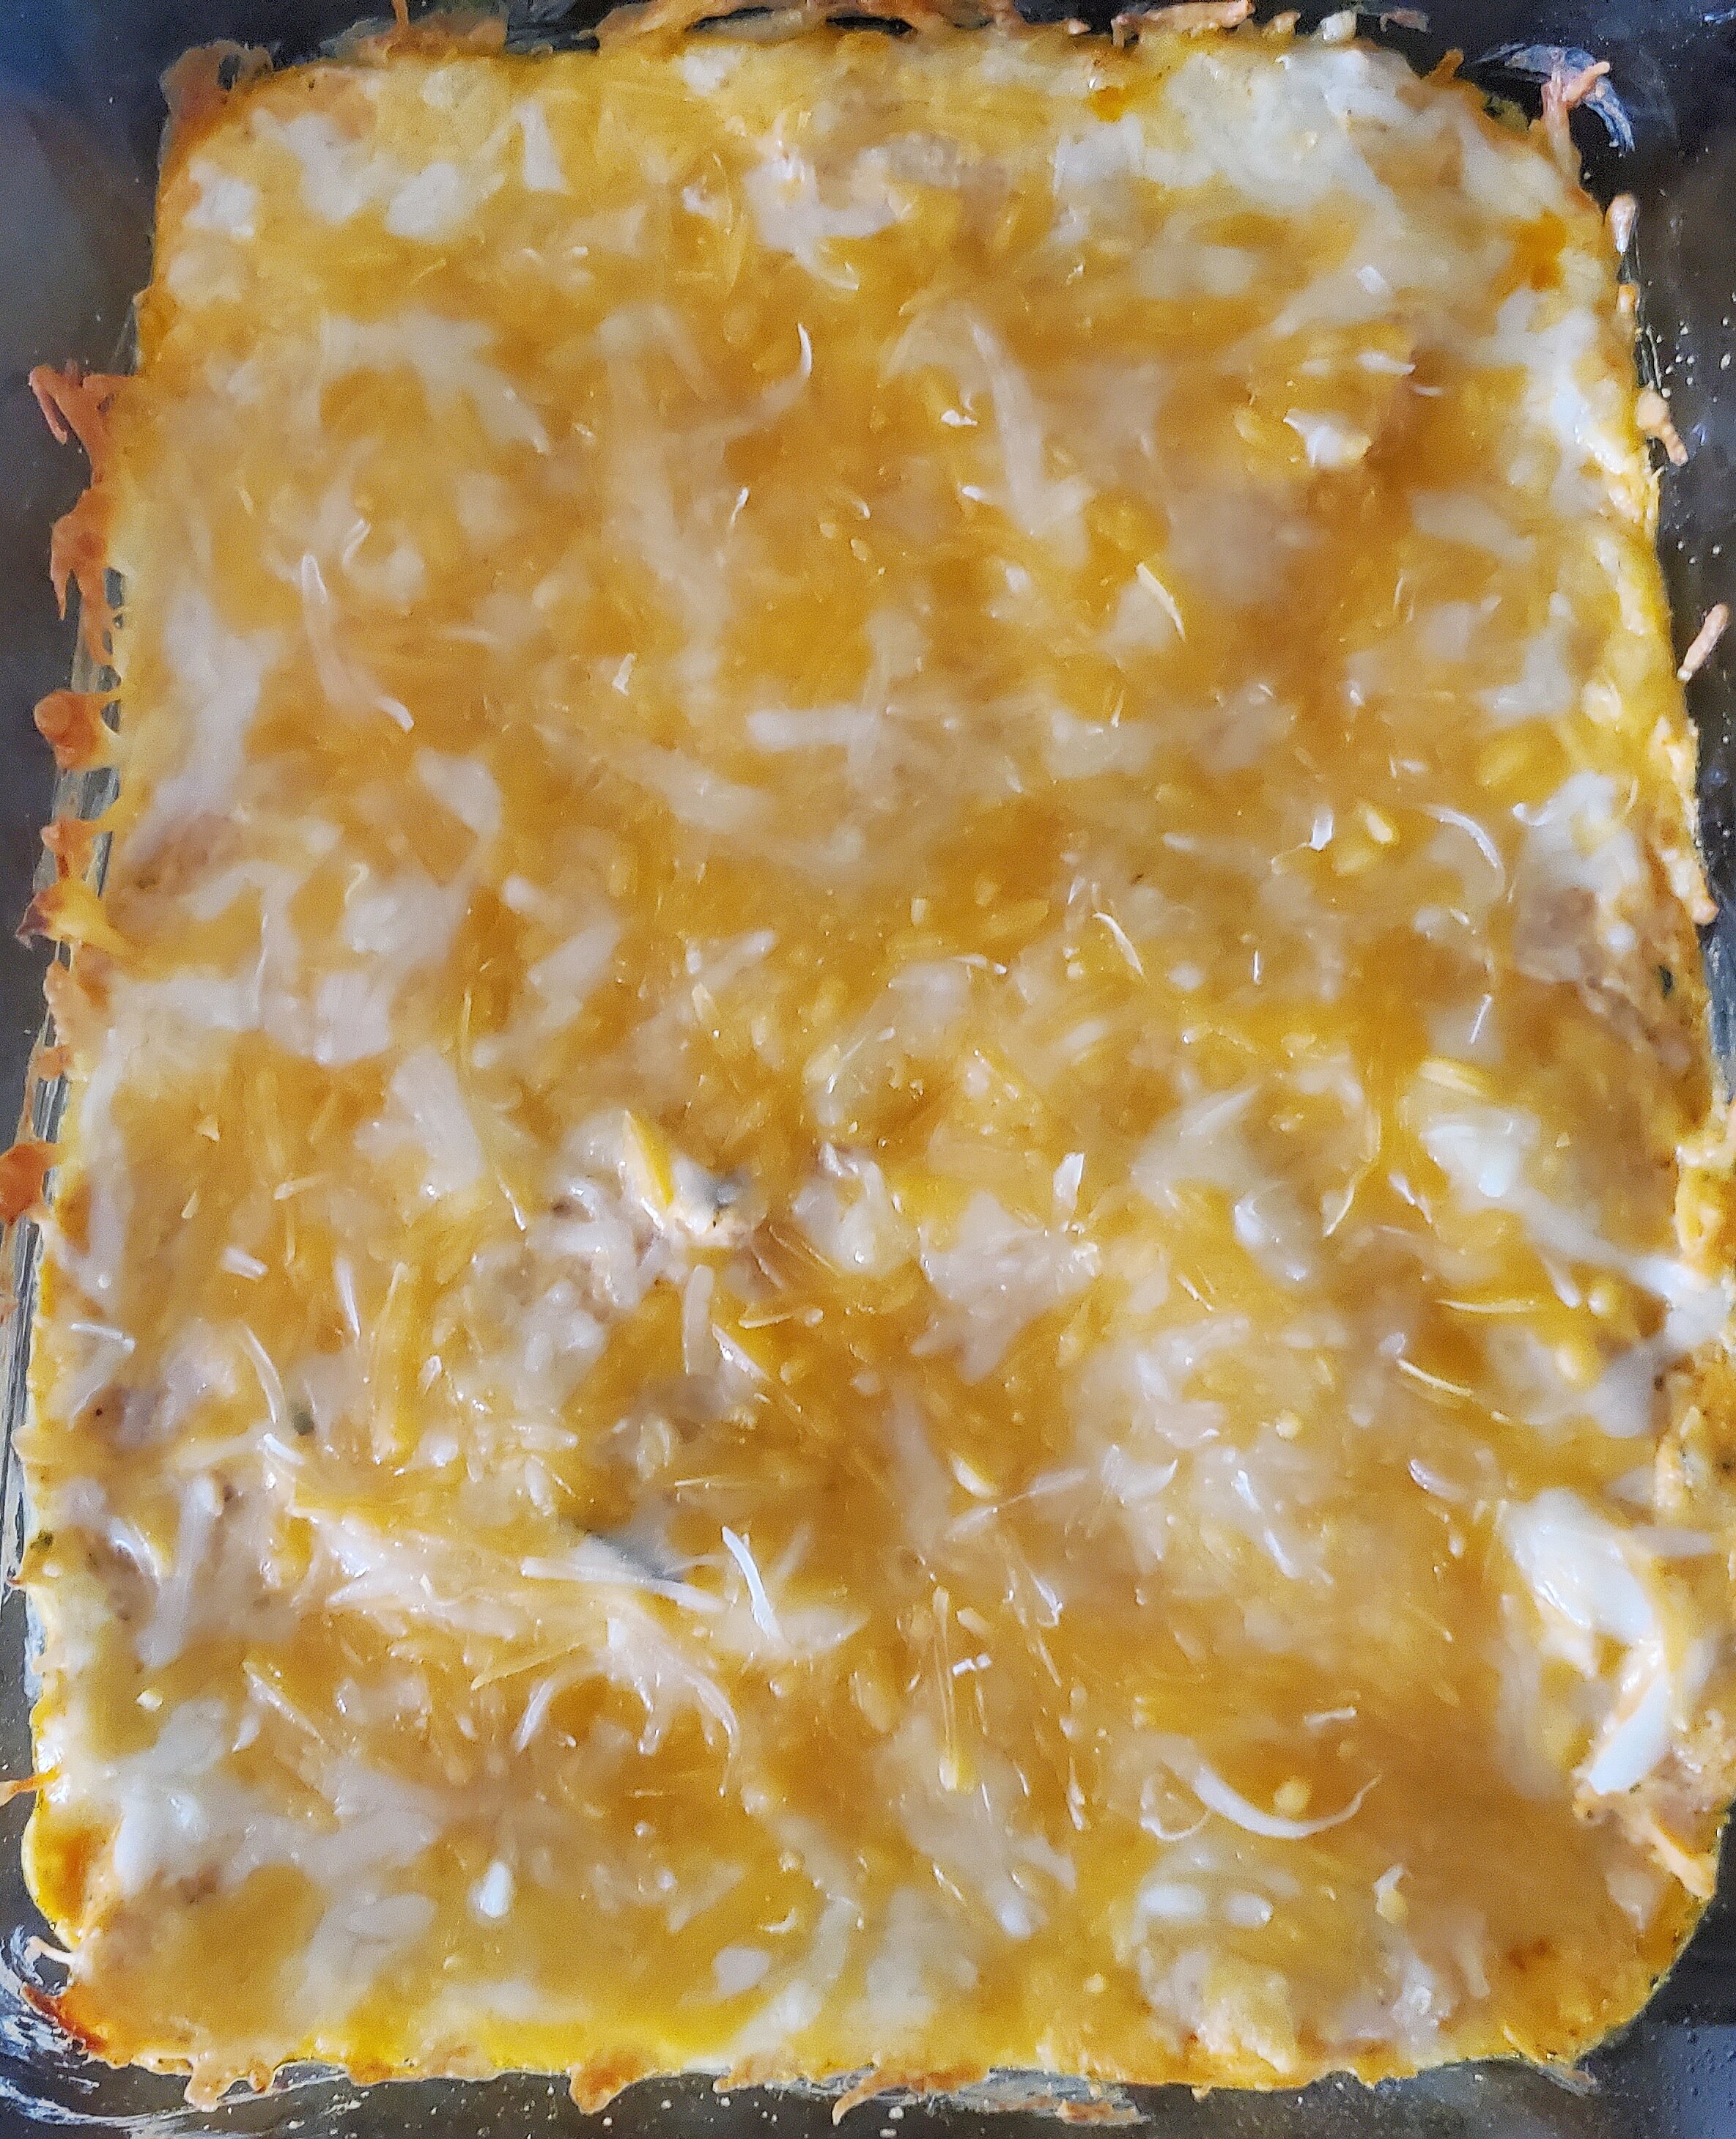 Add to a 9x9 baking dish, then top with shredded cheese. Bake at 425 for 12-15 minutes. - 